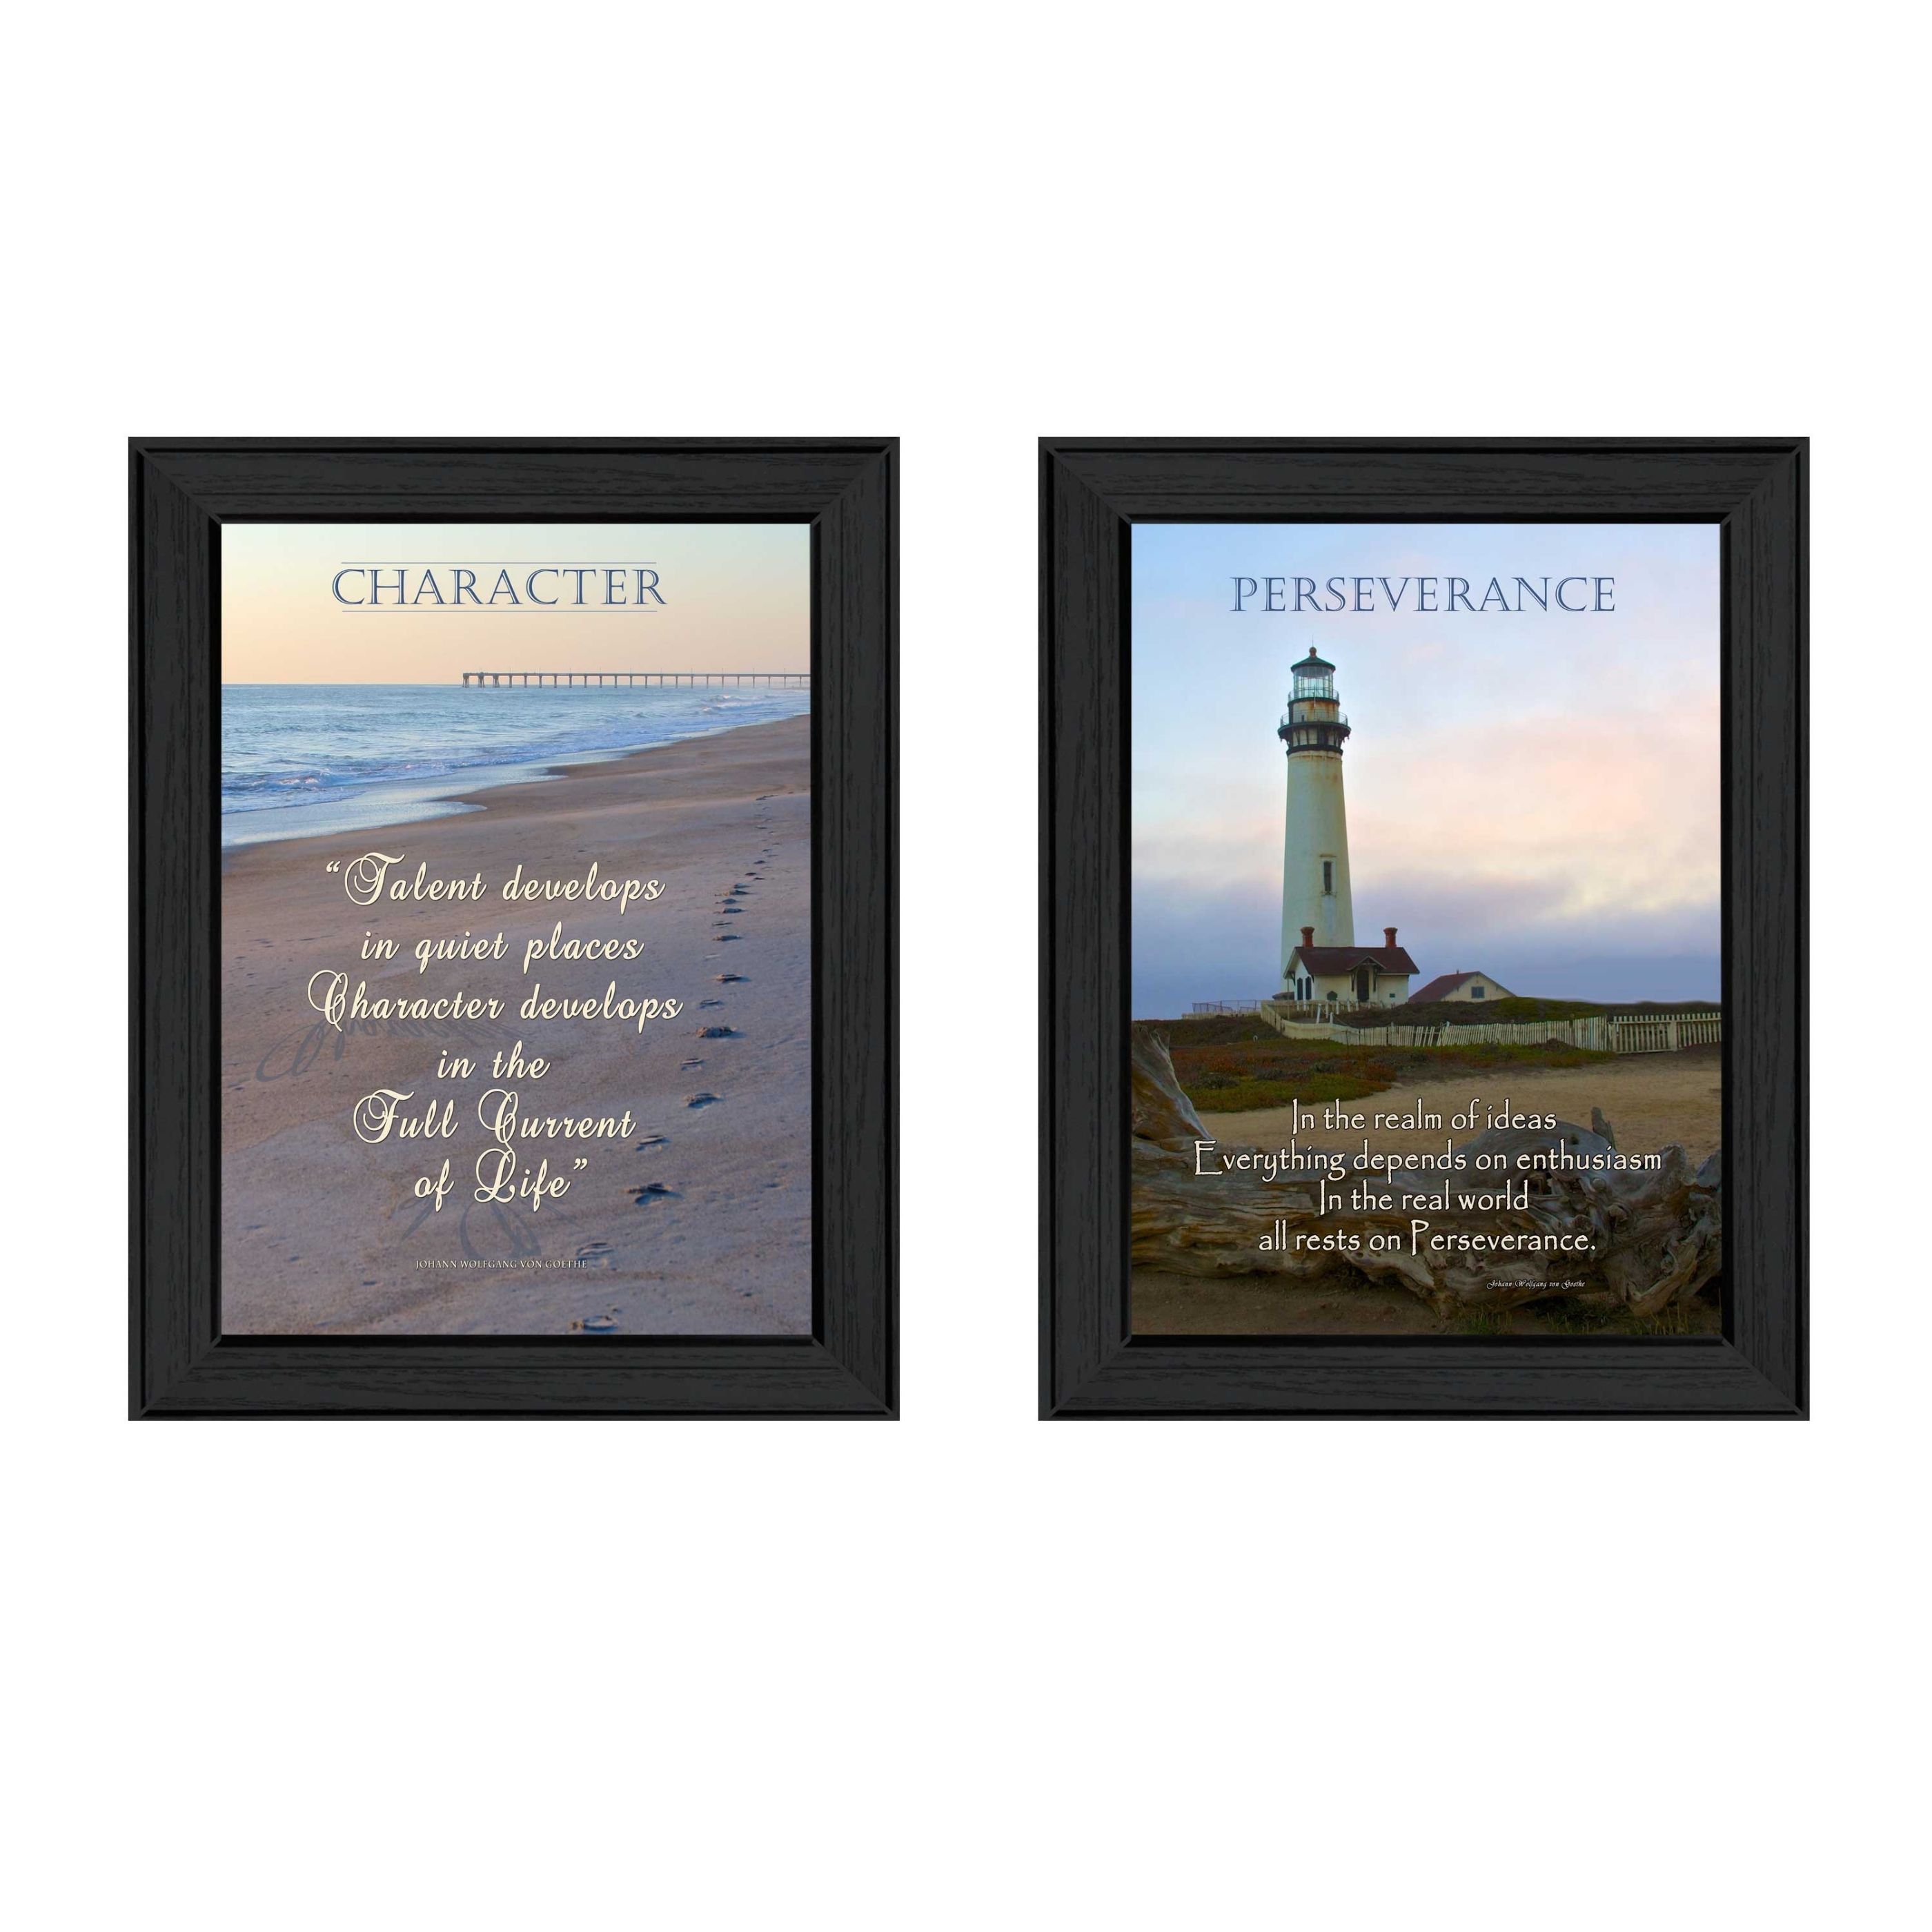 "Character Collection" 2-Piece Vignette By Trendy Decor4U, Printed Wall Art, Ready To Hang Framed Poster, Black Frame